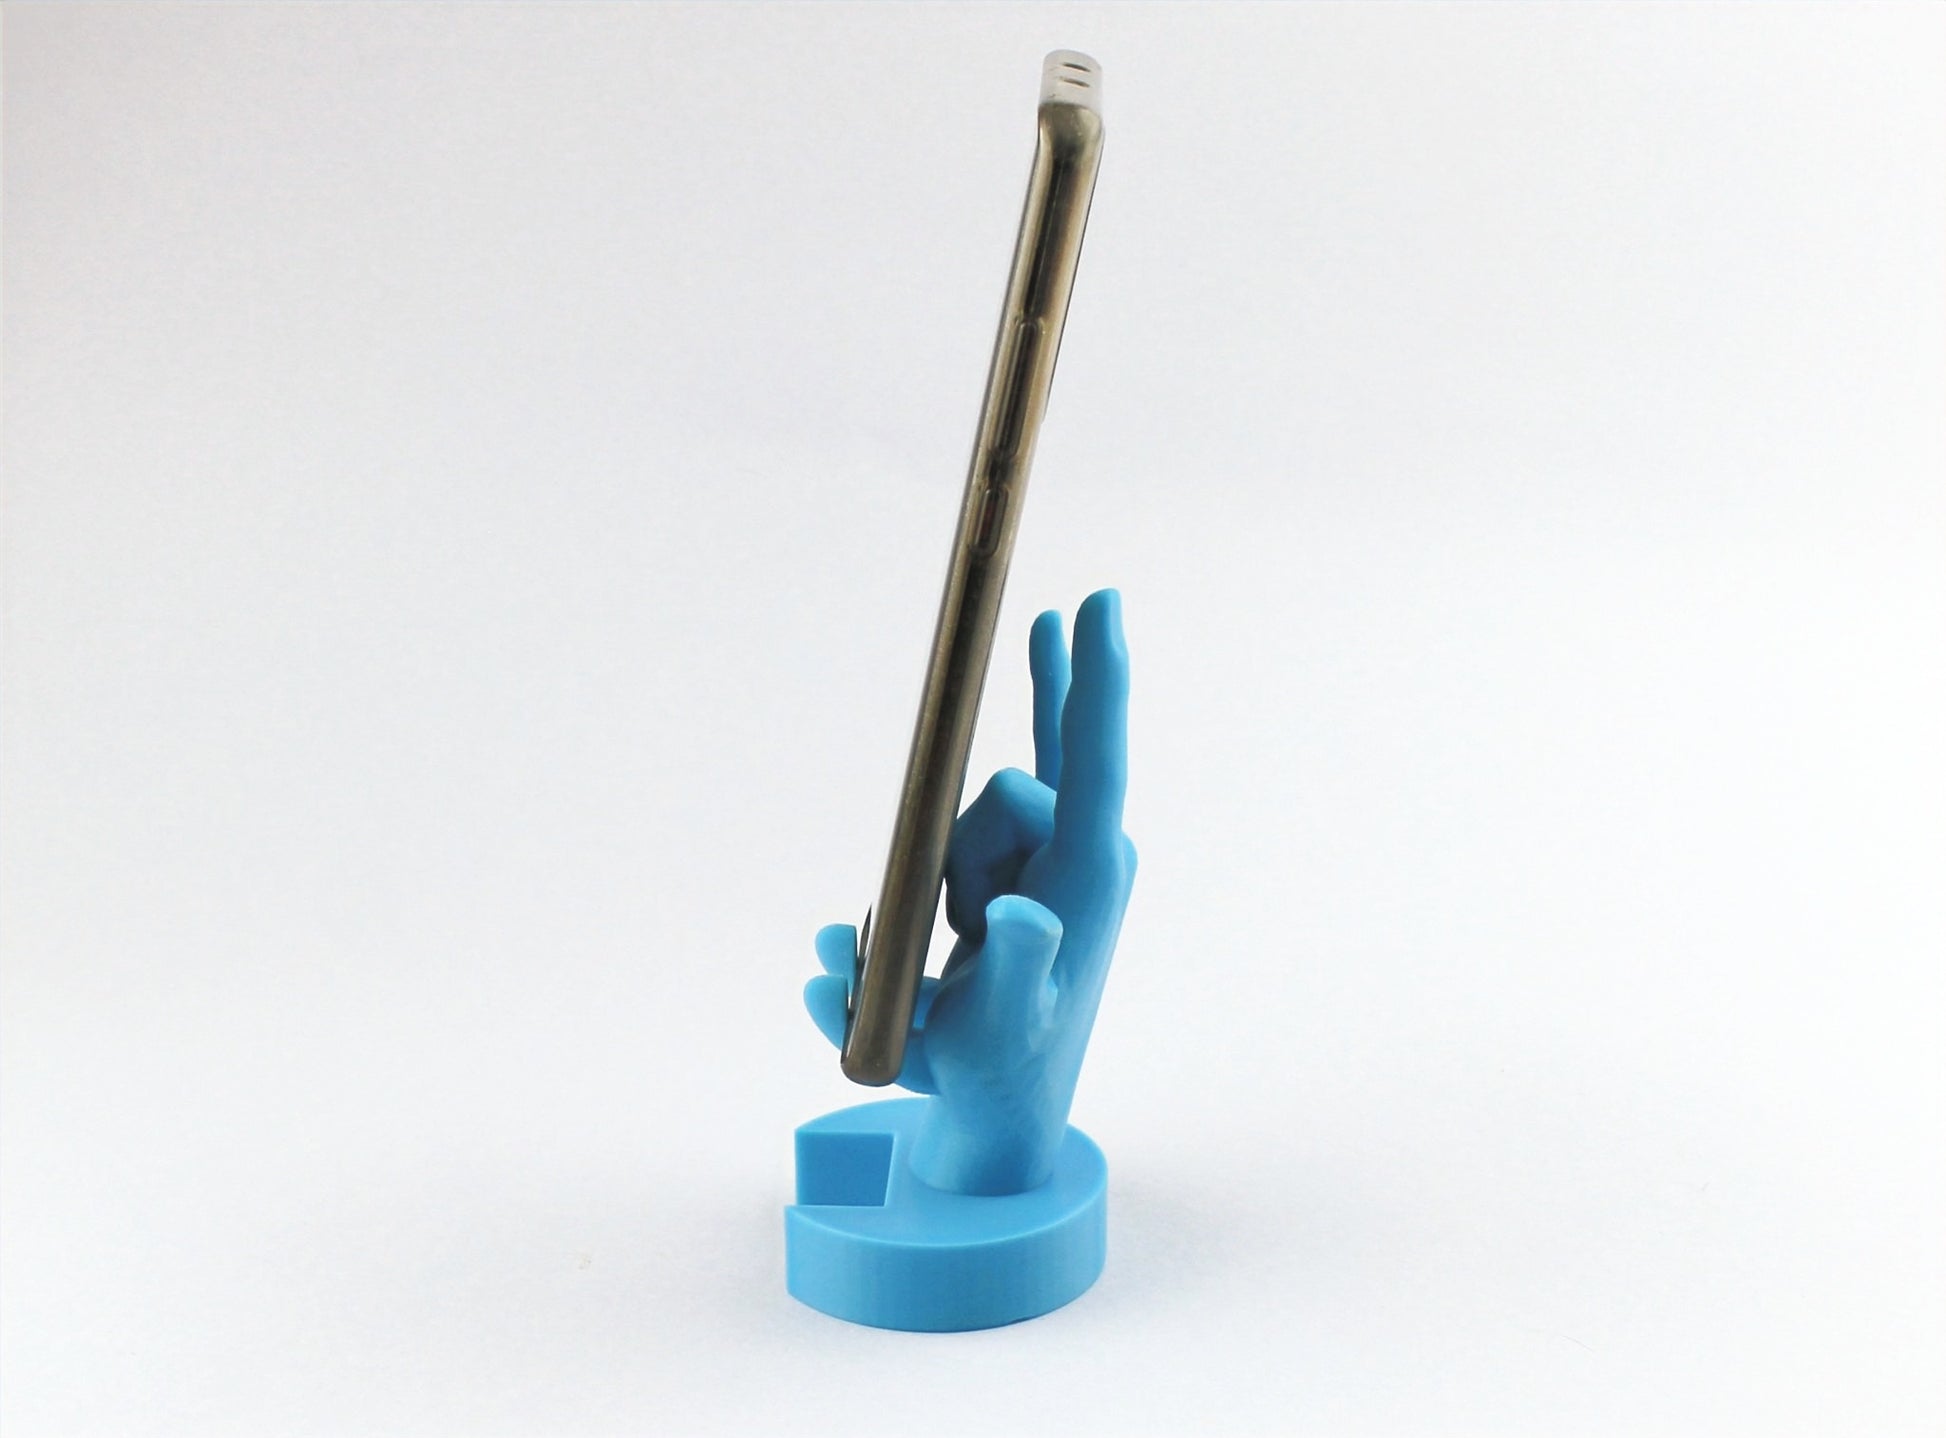 Light blue 3D Printed I Love You Sign Language Phone Holder with phone